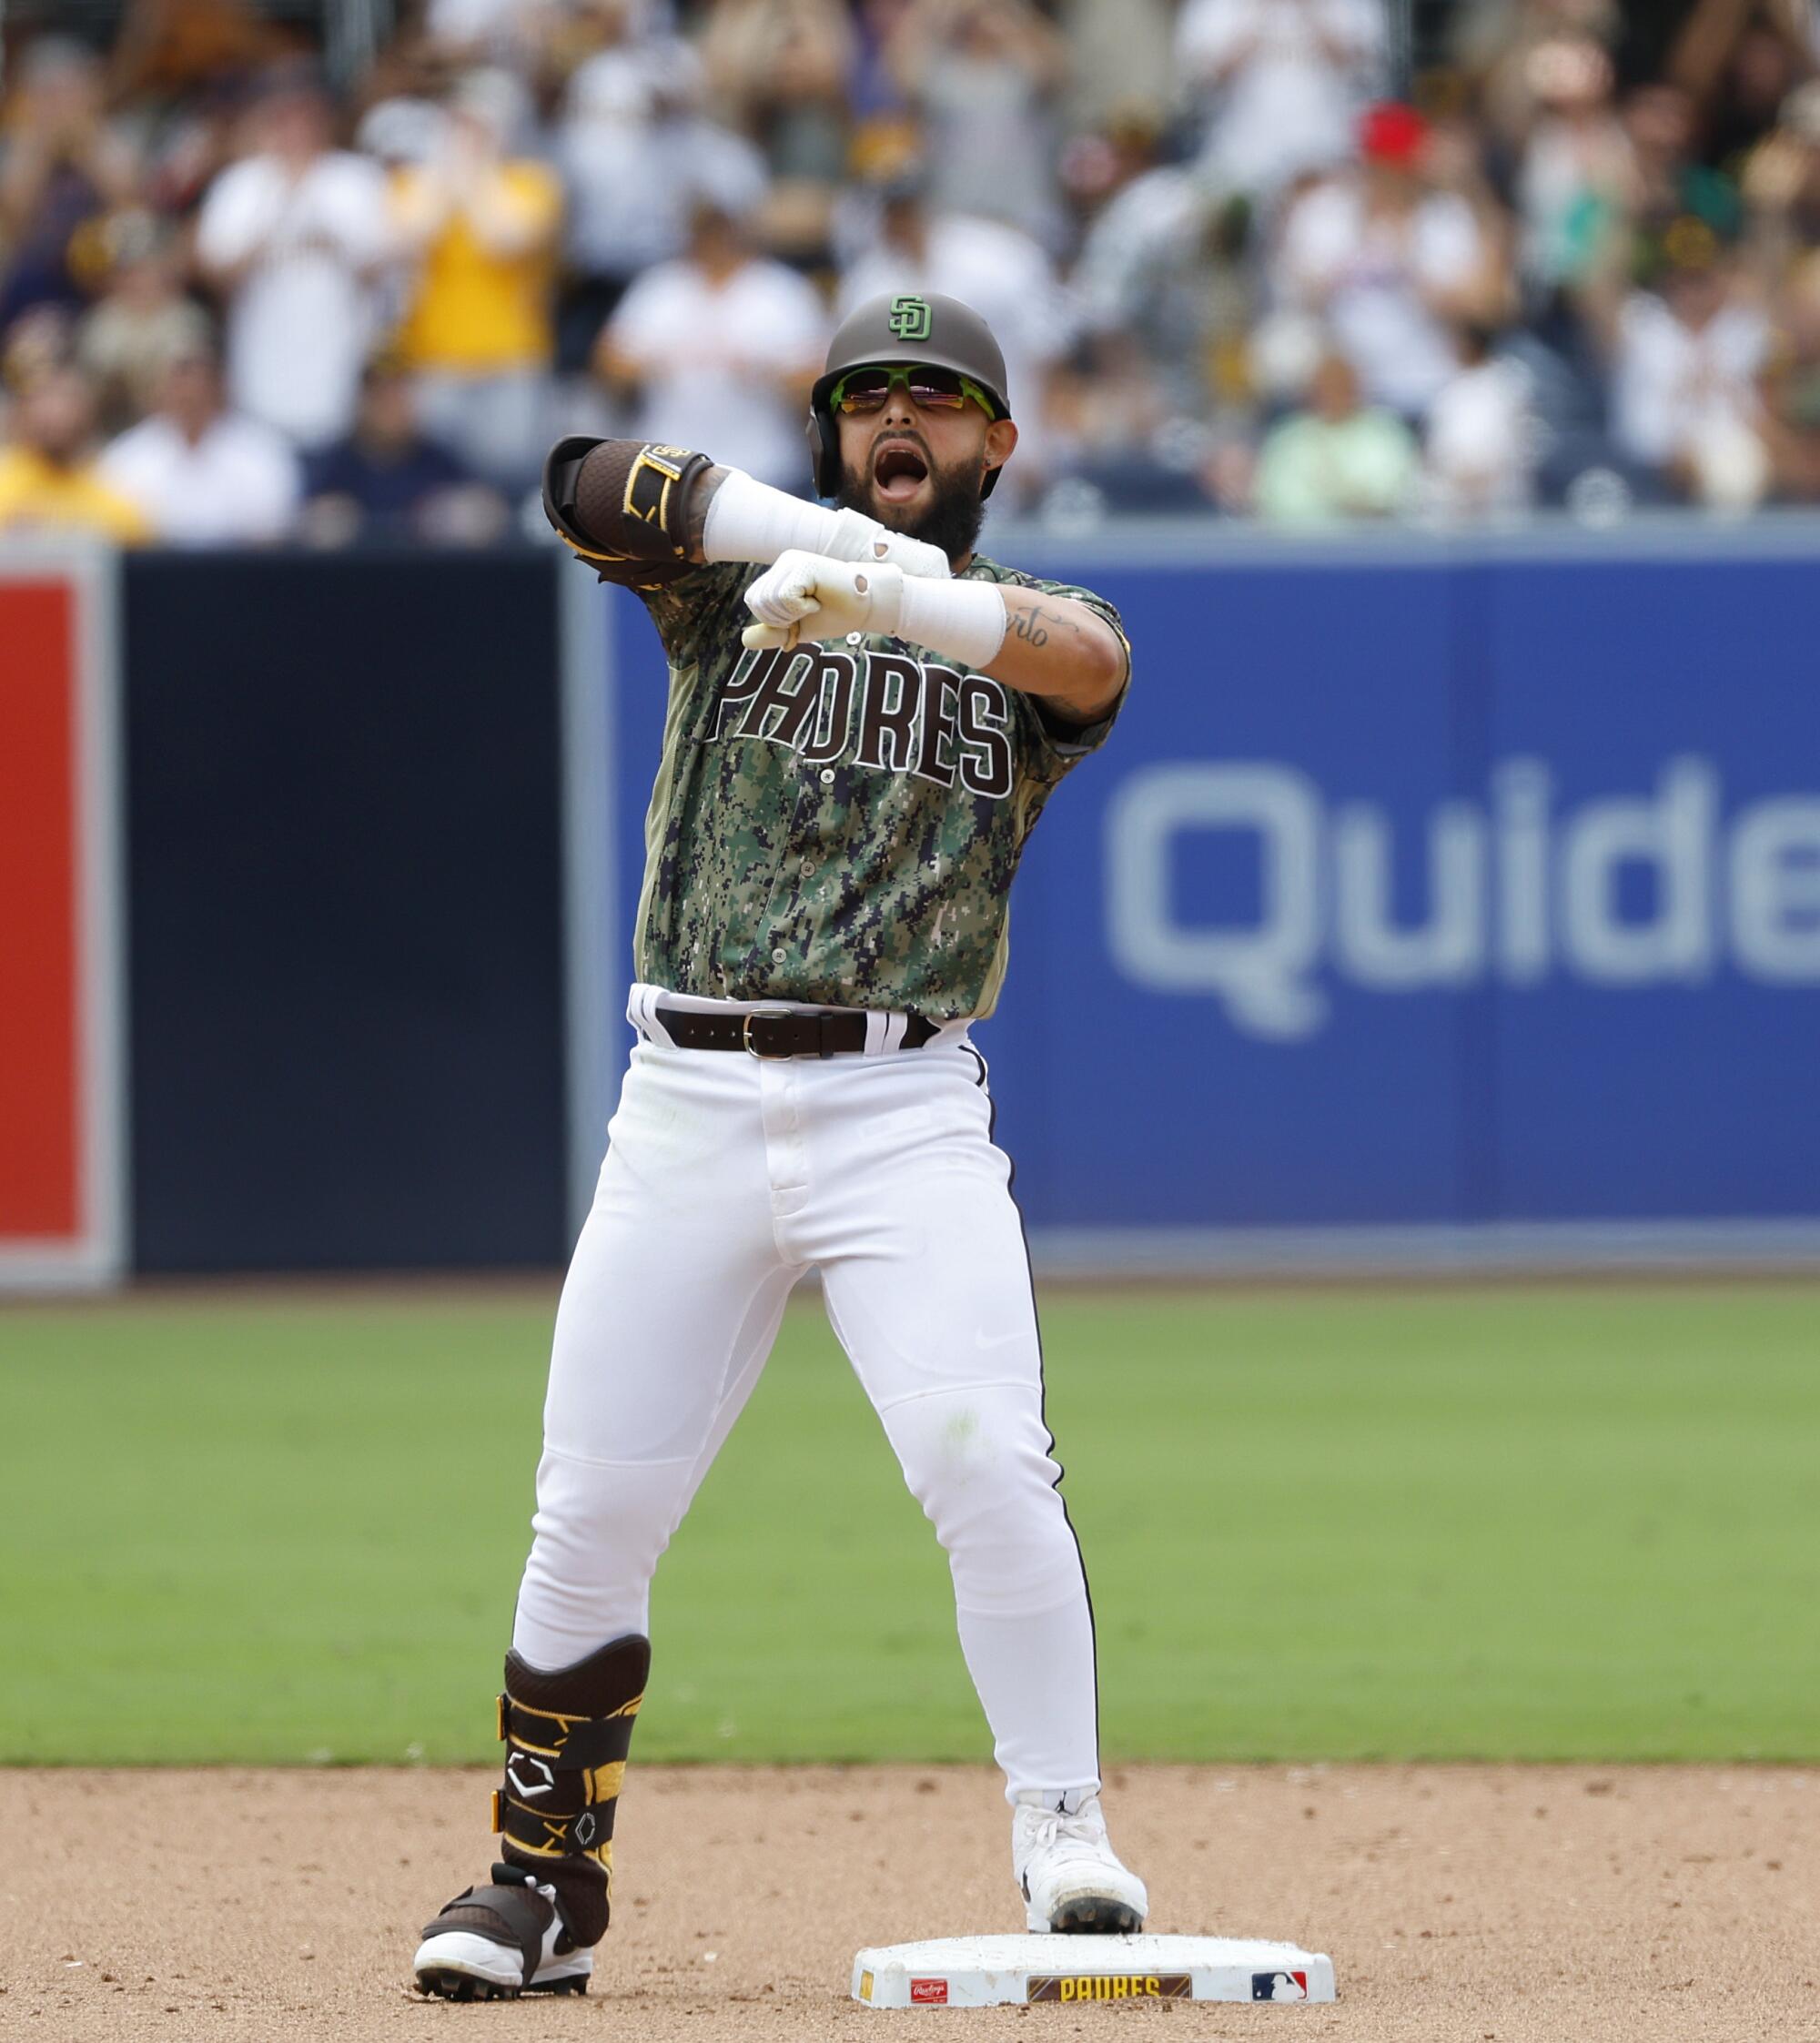 Padres sign infielder Rougned Odor to minor-league deal, per